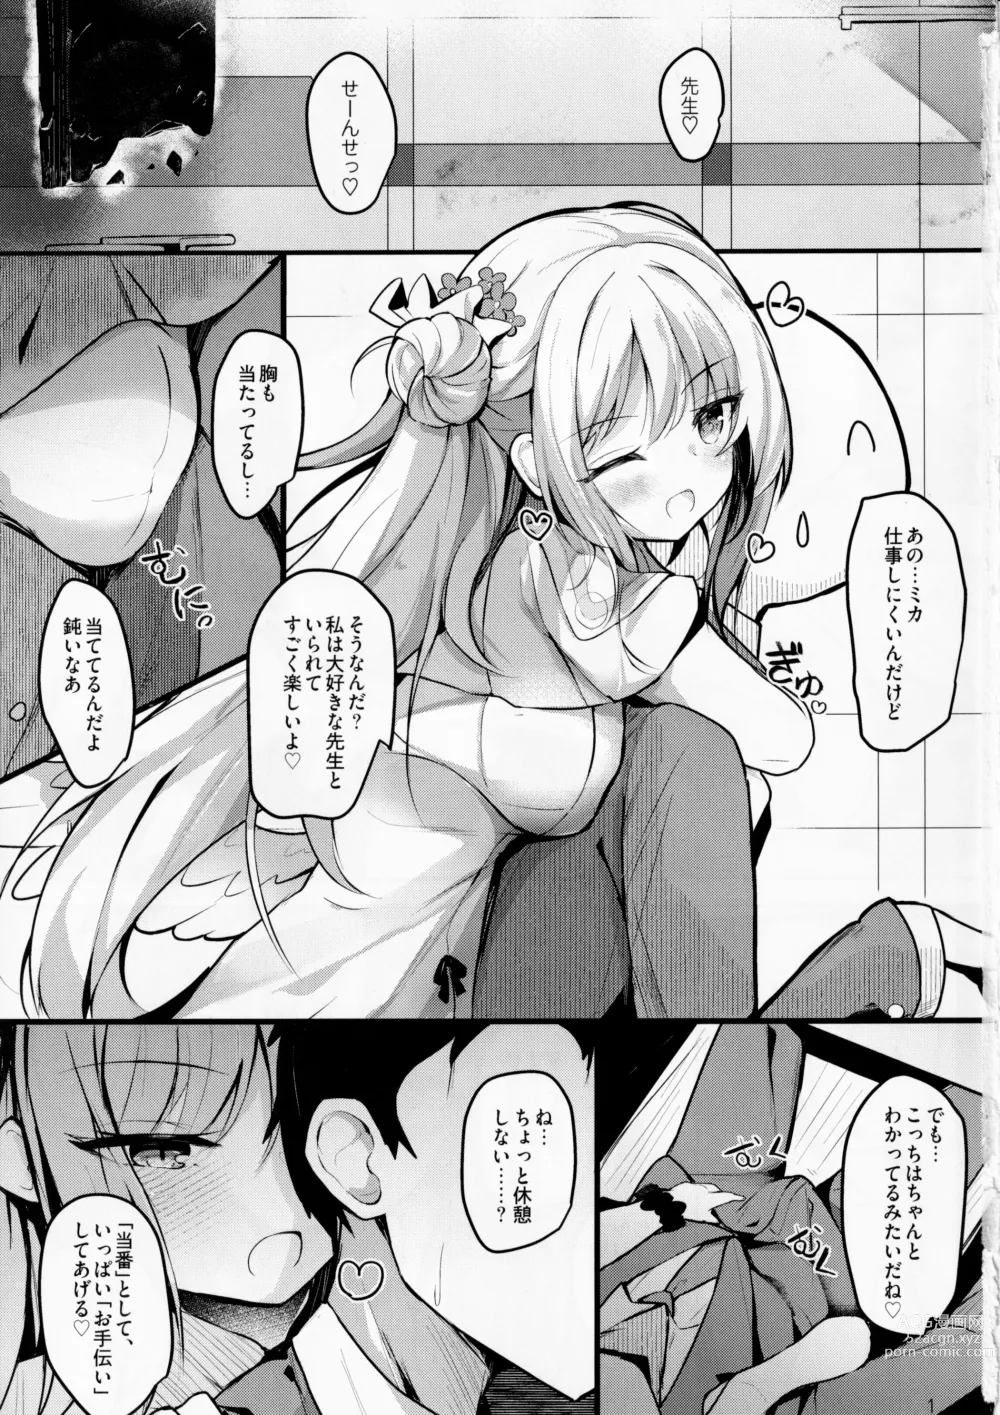 Page 2 of doujinshi Mika no Yuuwaku Tanetsu Ecchi - She seduces her loving teacher and gets him to have sex with her inside.